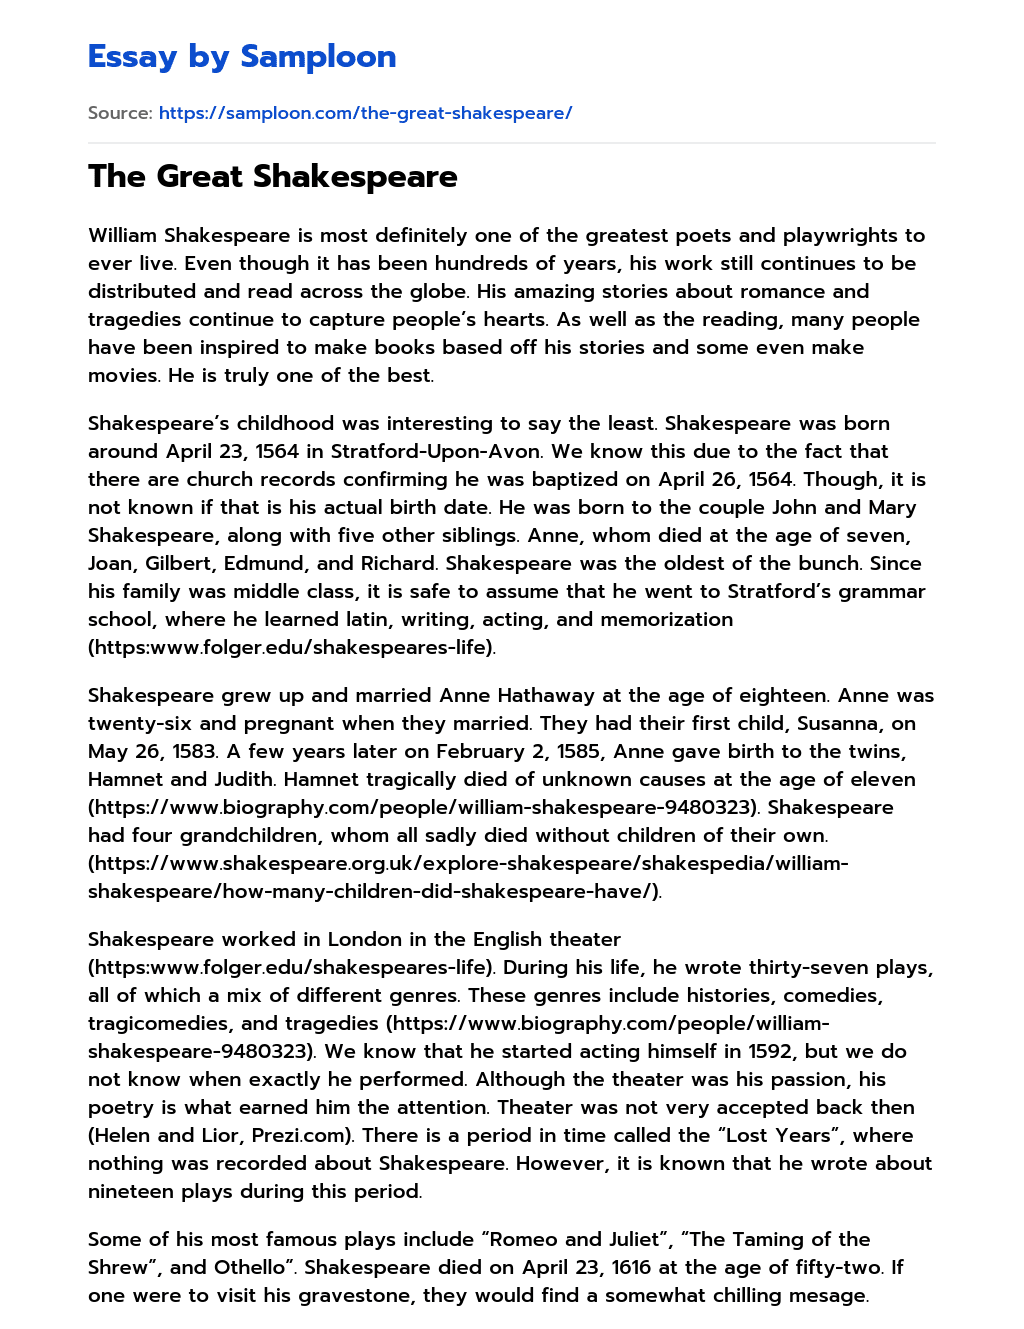 The Great Shakespeare essay